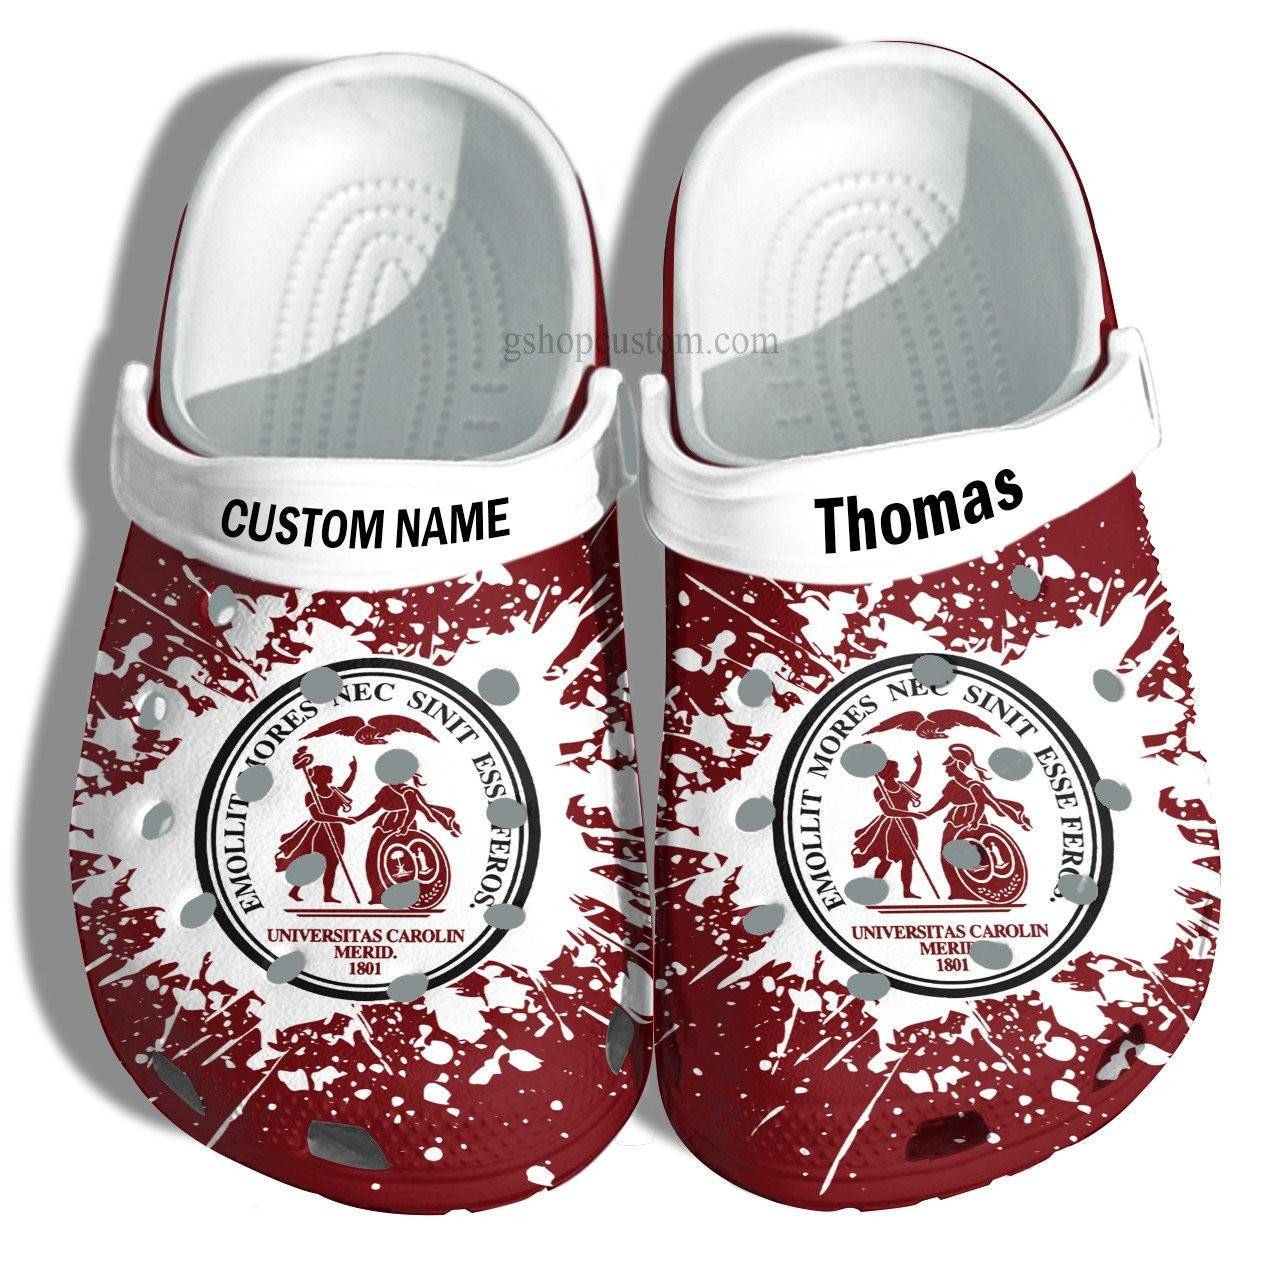 University Of South Carolina Graduation Gifts Croc Shoes Customize – Admission Gift Crocss Shoes